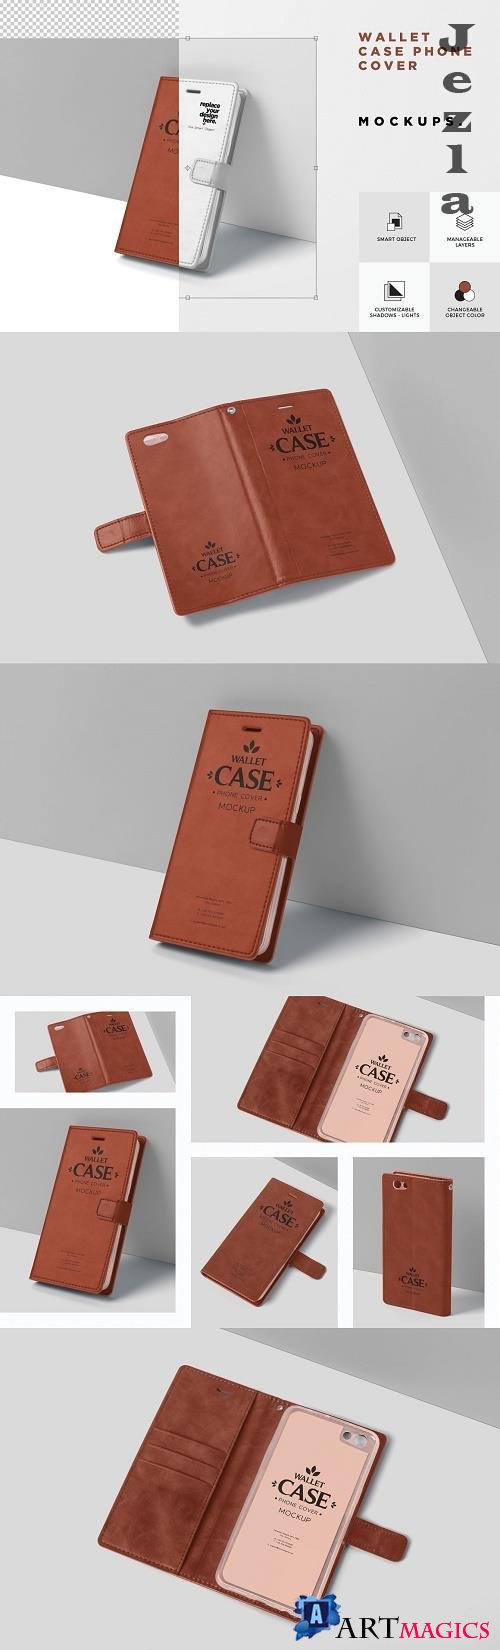 Wallet Case Phone Cover Mockup - 6072990